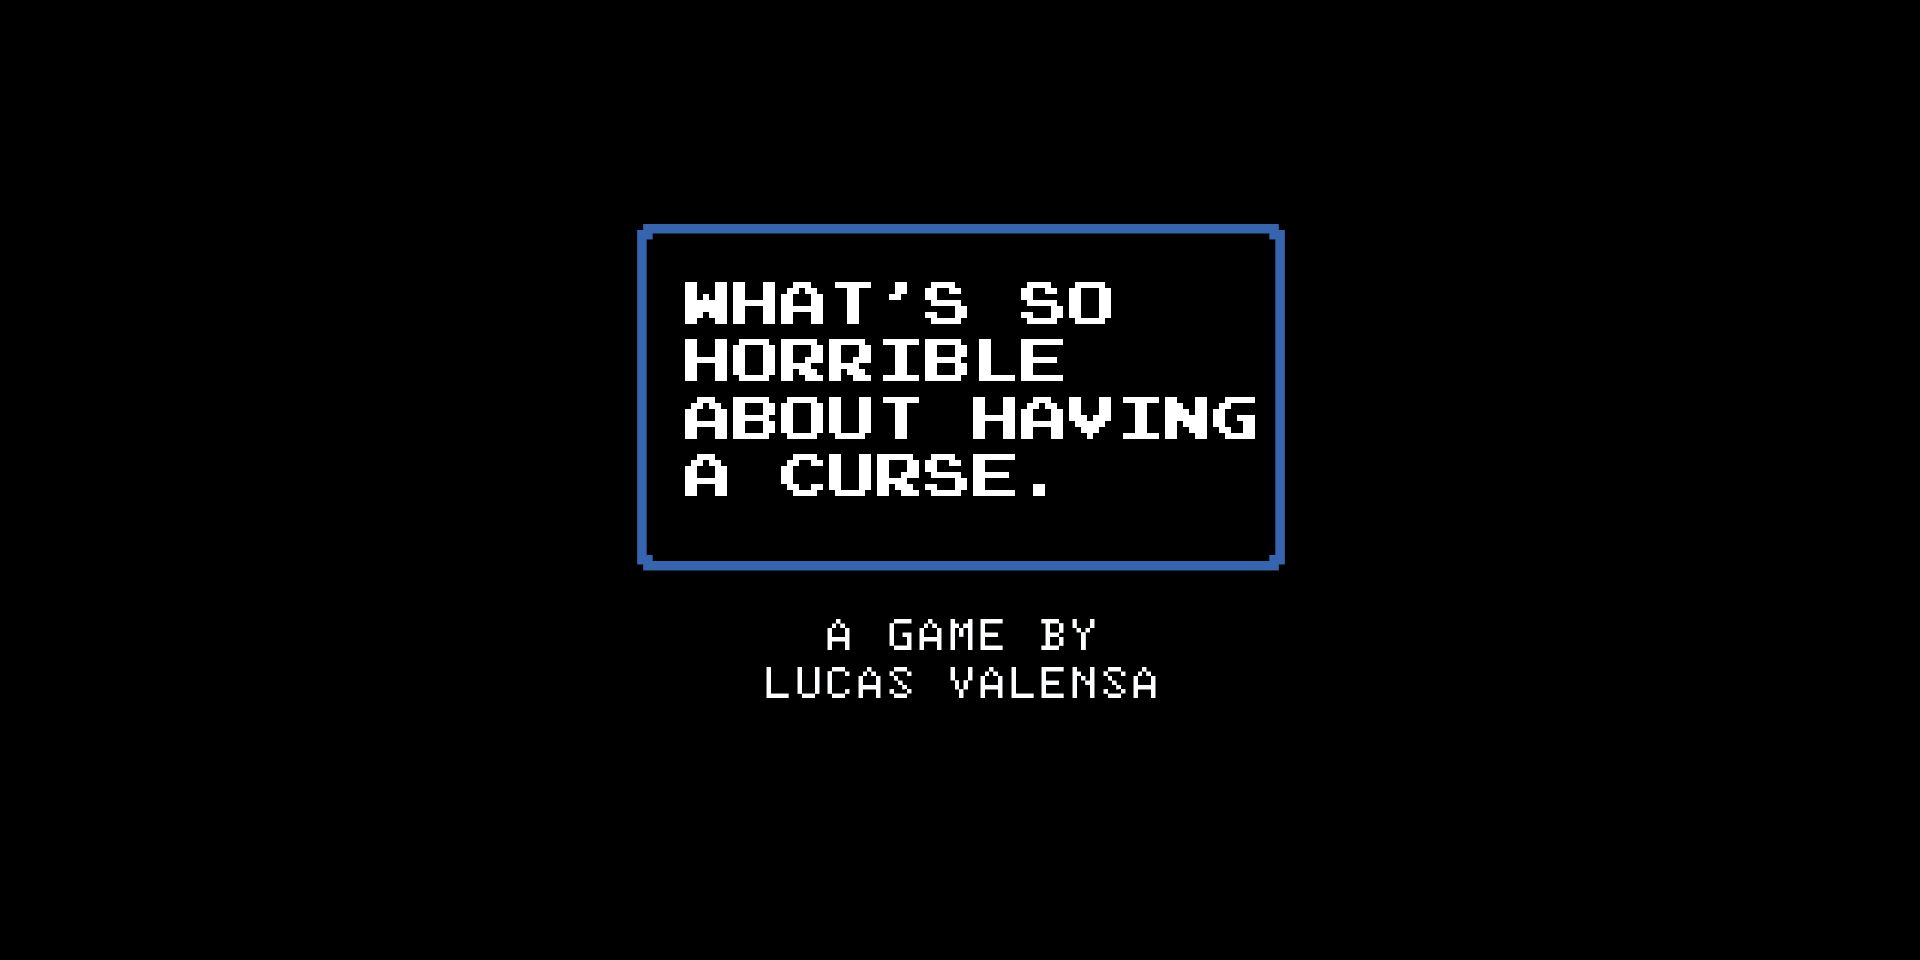 Castlevania Style Tabletop RPGs What's So Horrible About Having A Curse